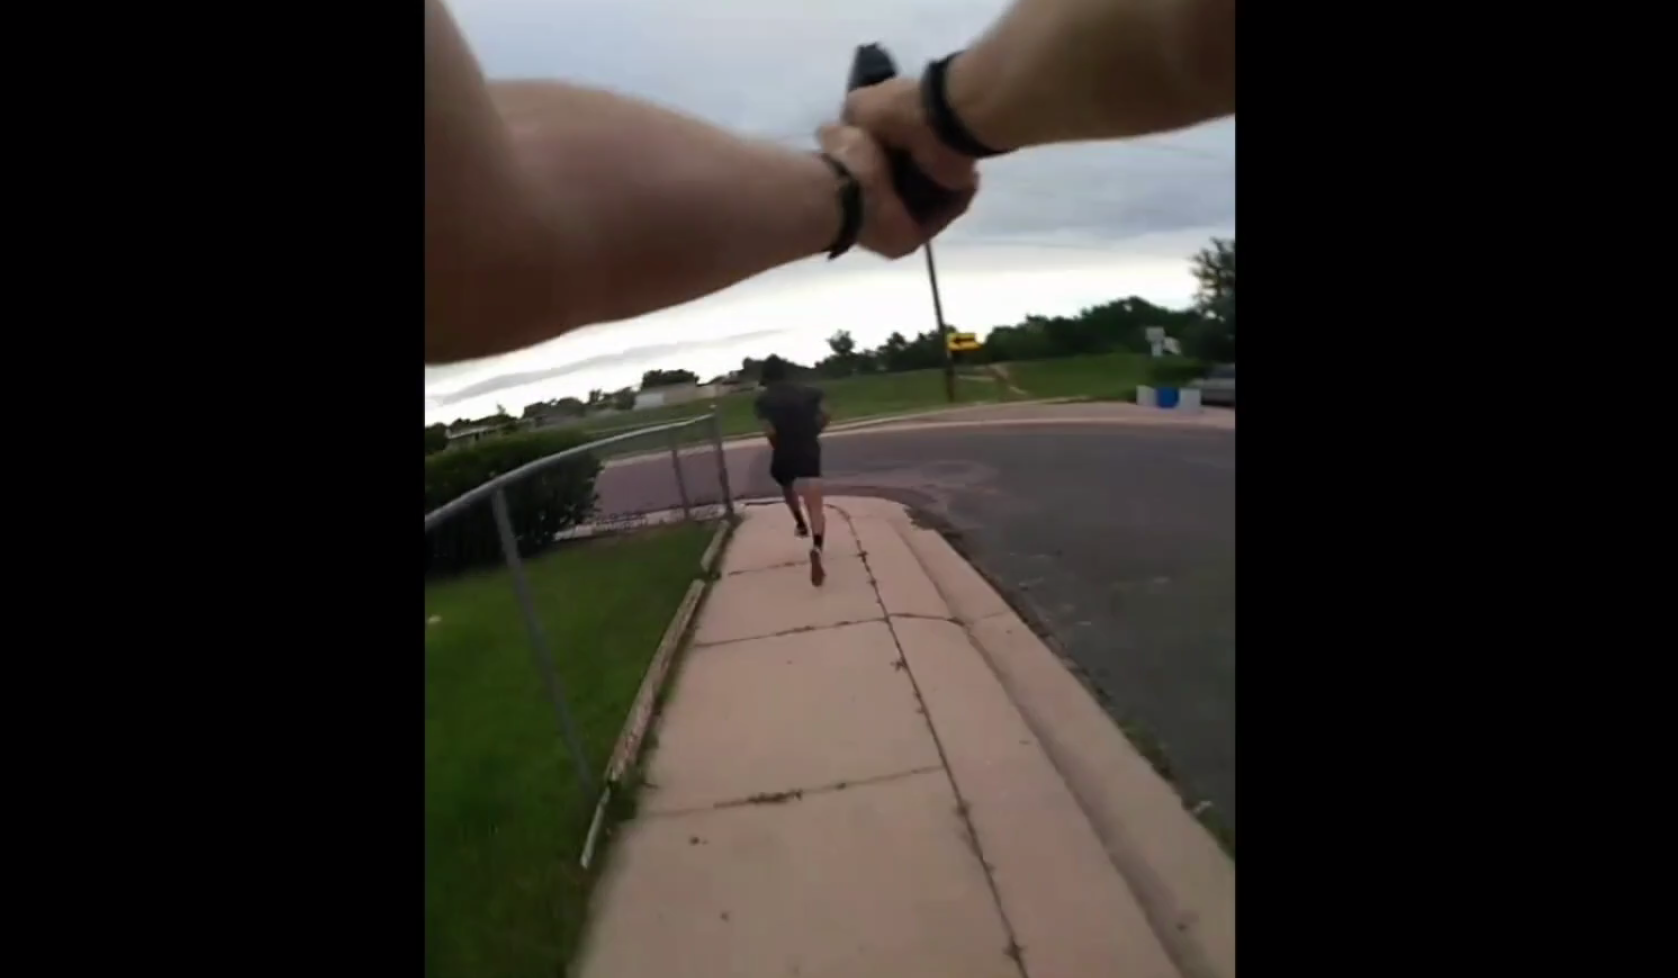 Image from badge camera of police officer shows hands holding a gun pointed at a small figure in distance running away on a path.